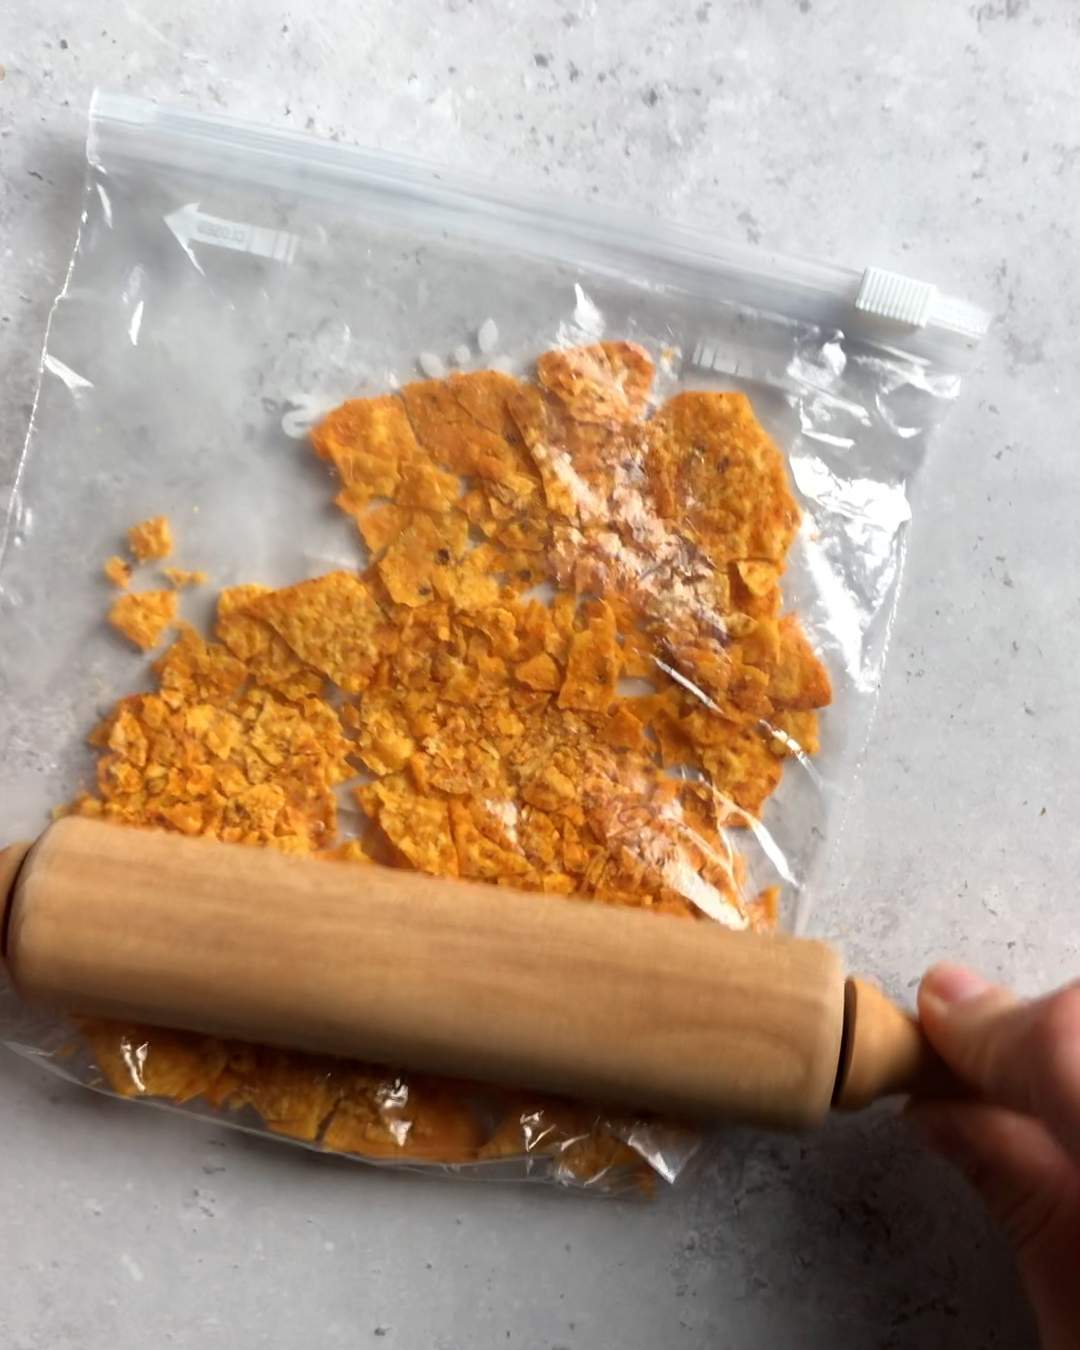 dorito tortilla chips in a freezer bag being crushed by a rolling pin